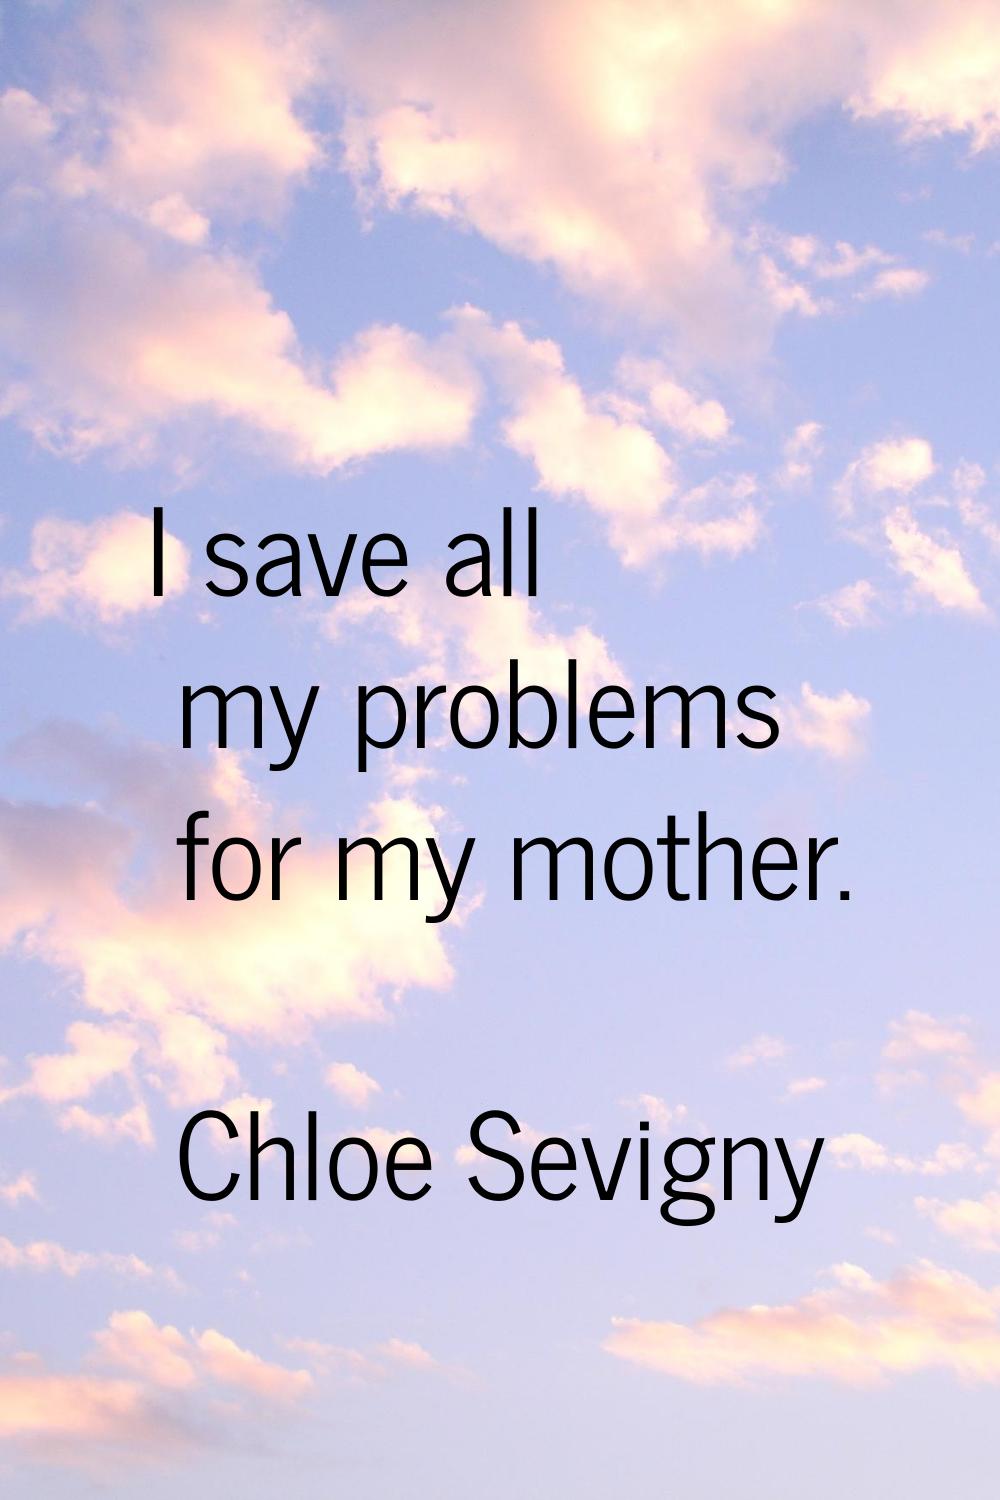 I save all my problems for my mother.